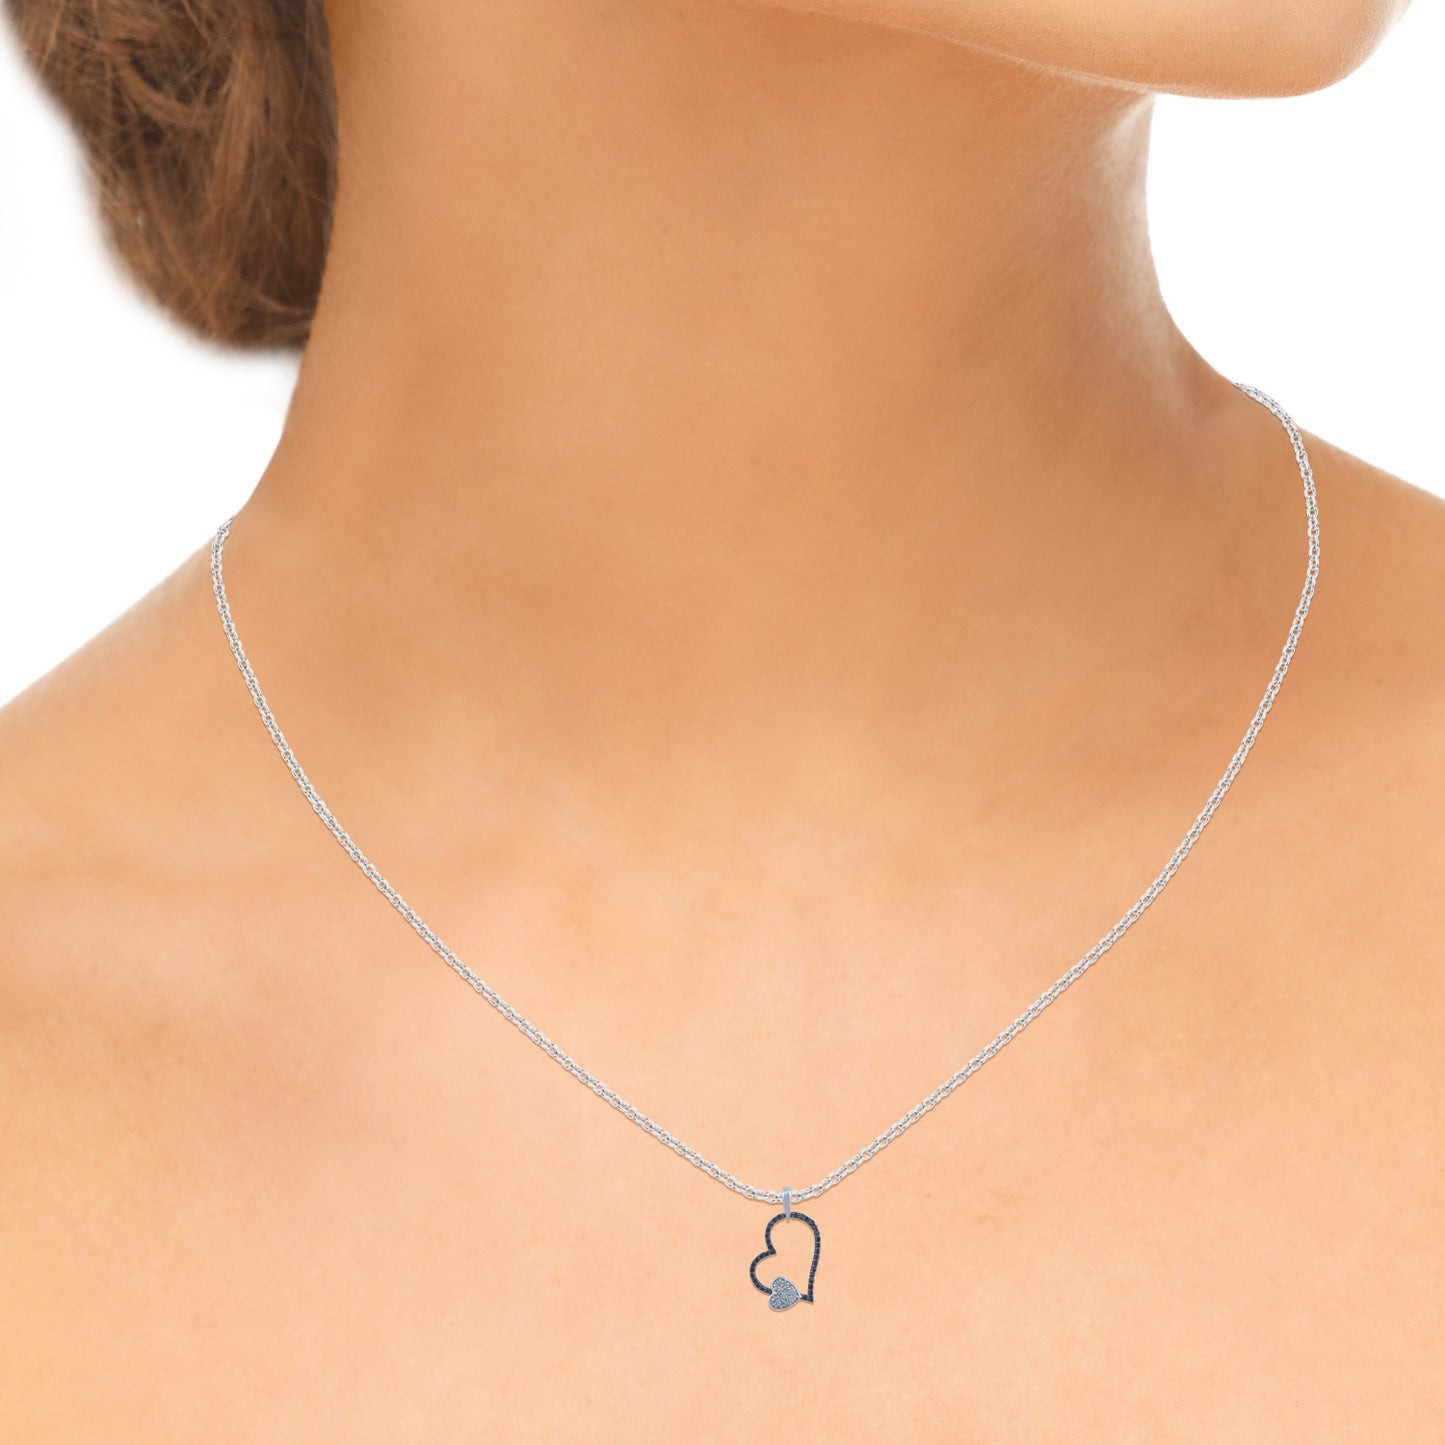 Treated Black Diamond Double Heart Pendant Necklace in 925 Sterling Silver